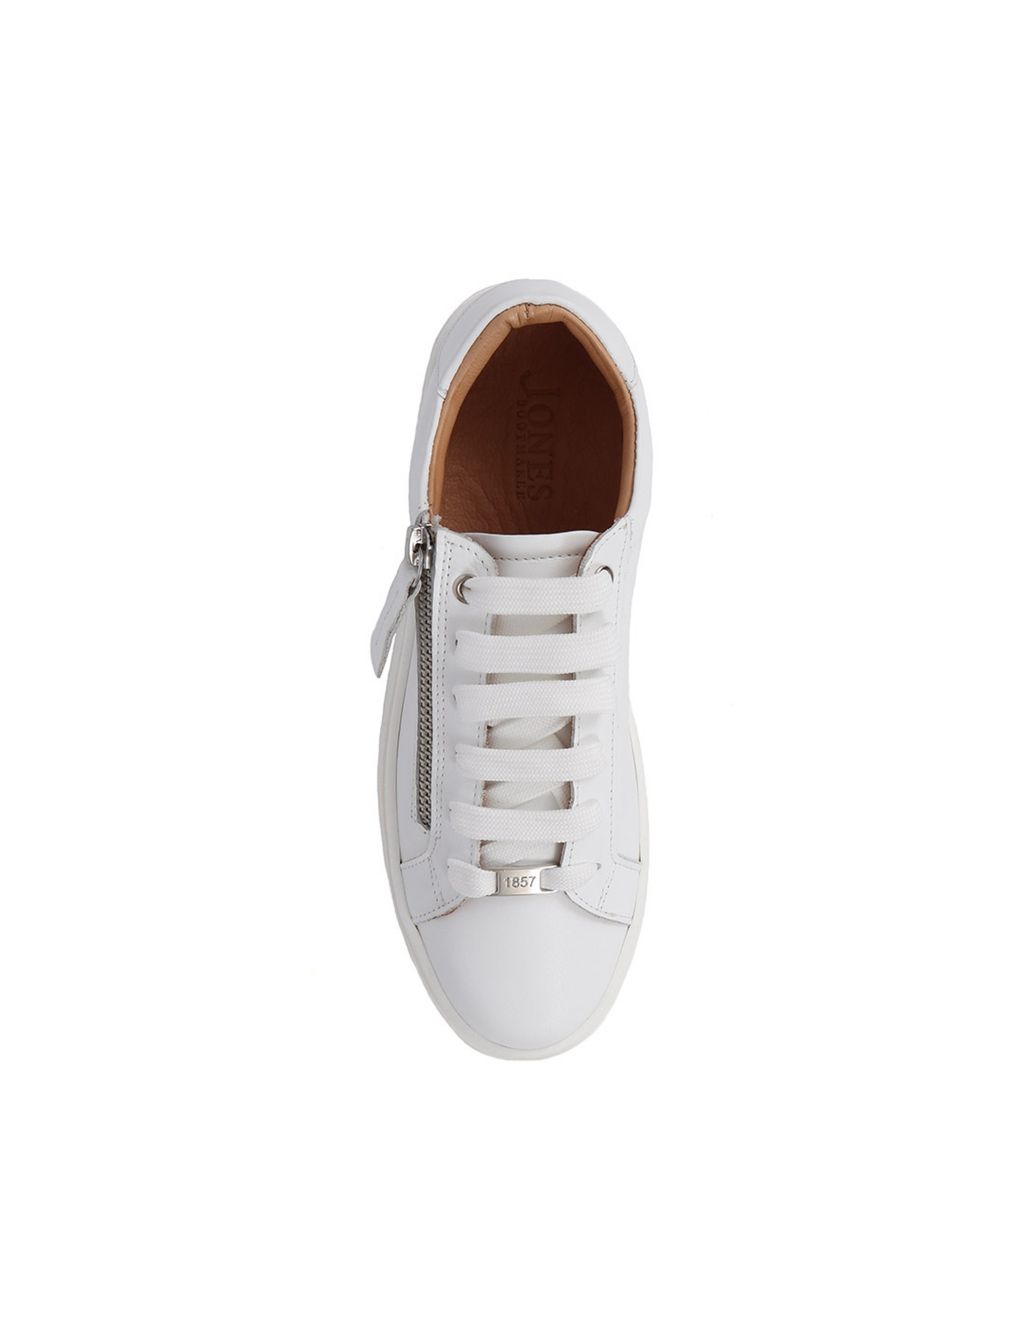 Leather Lace Up Flatform Trainers image 5